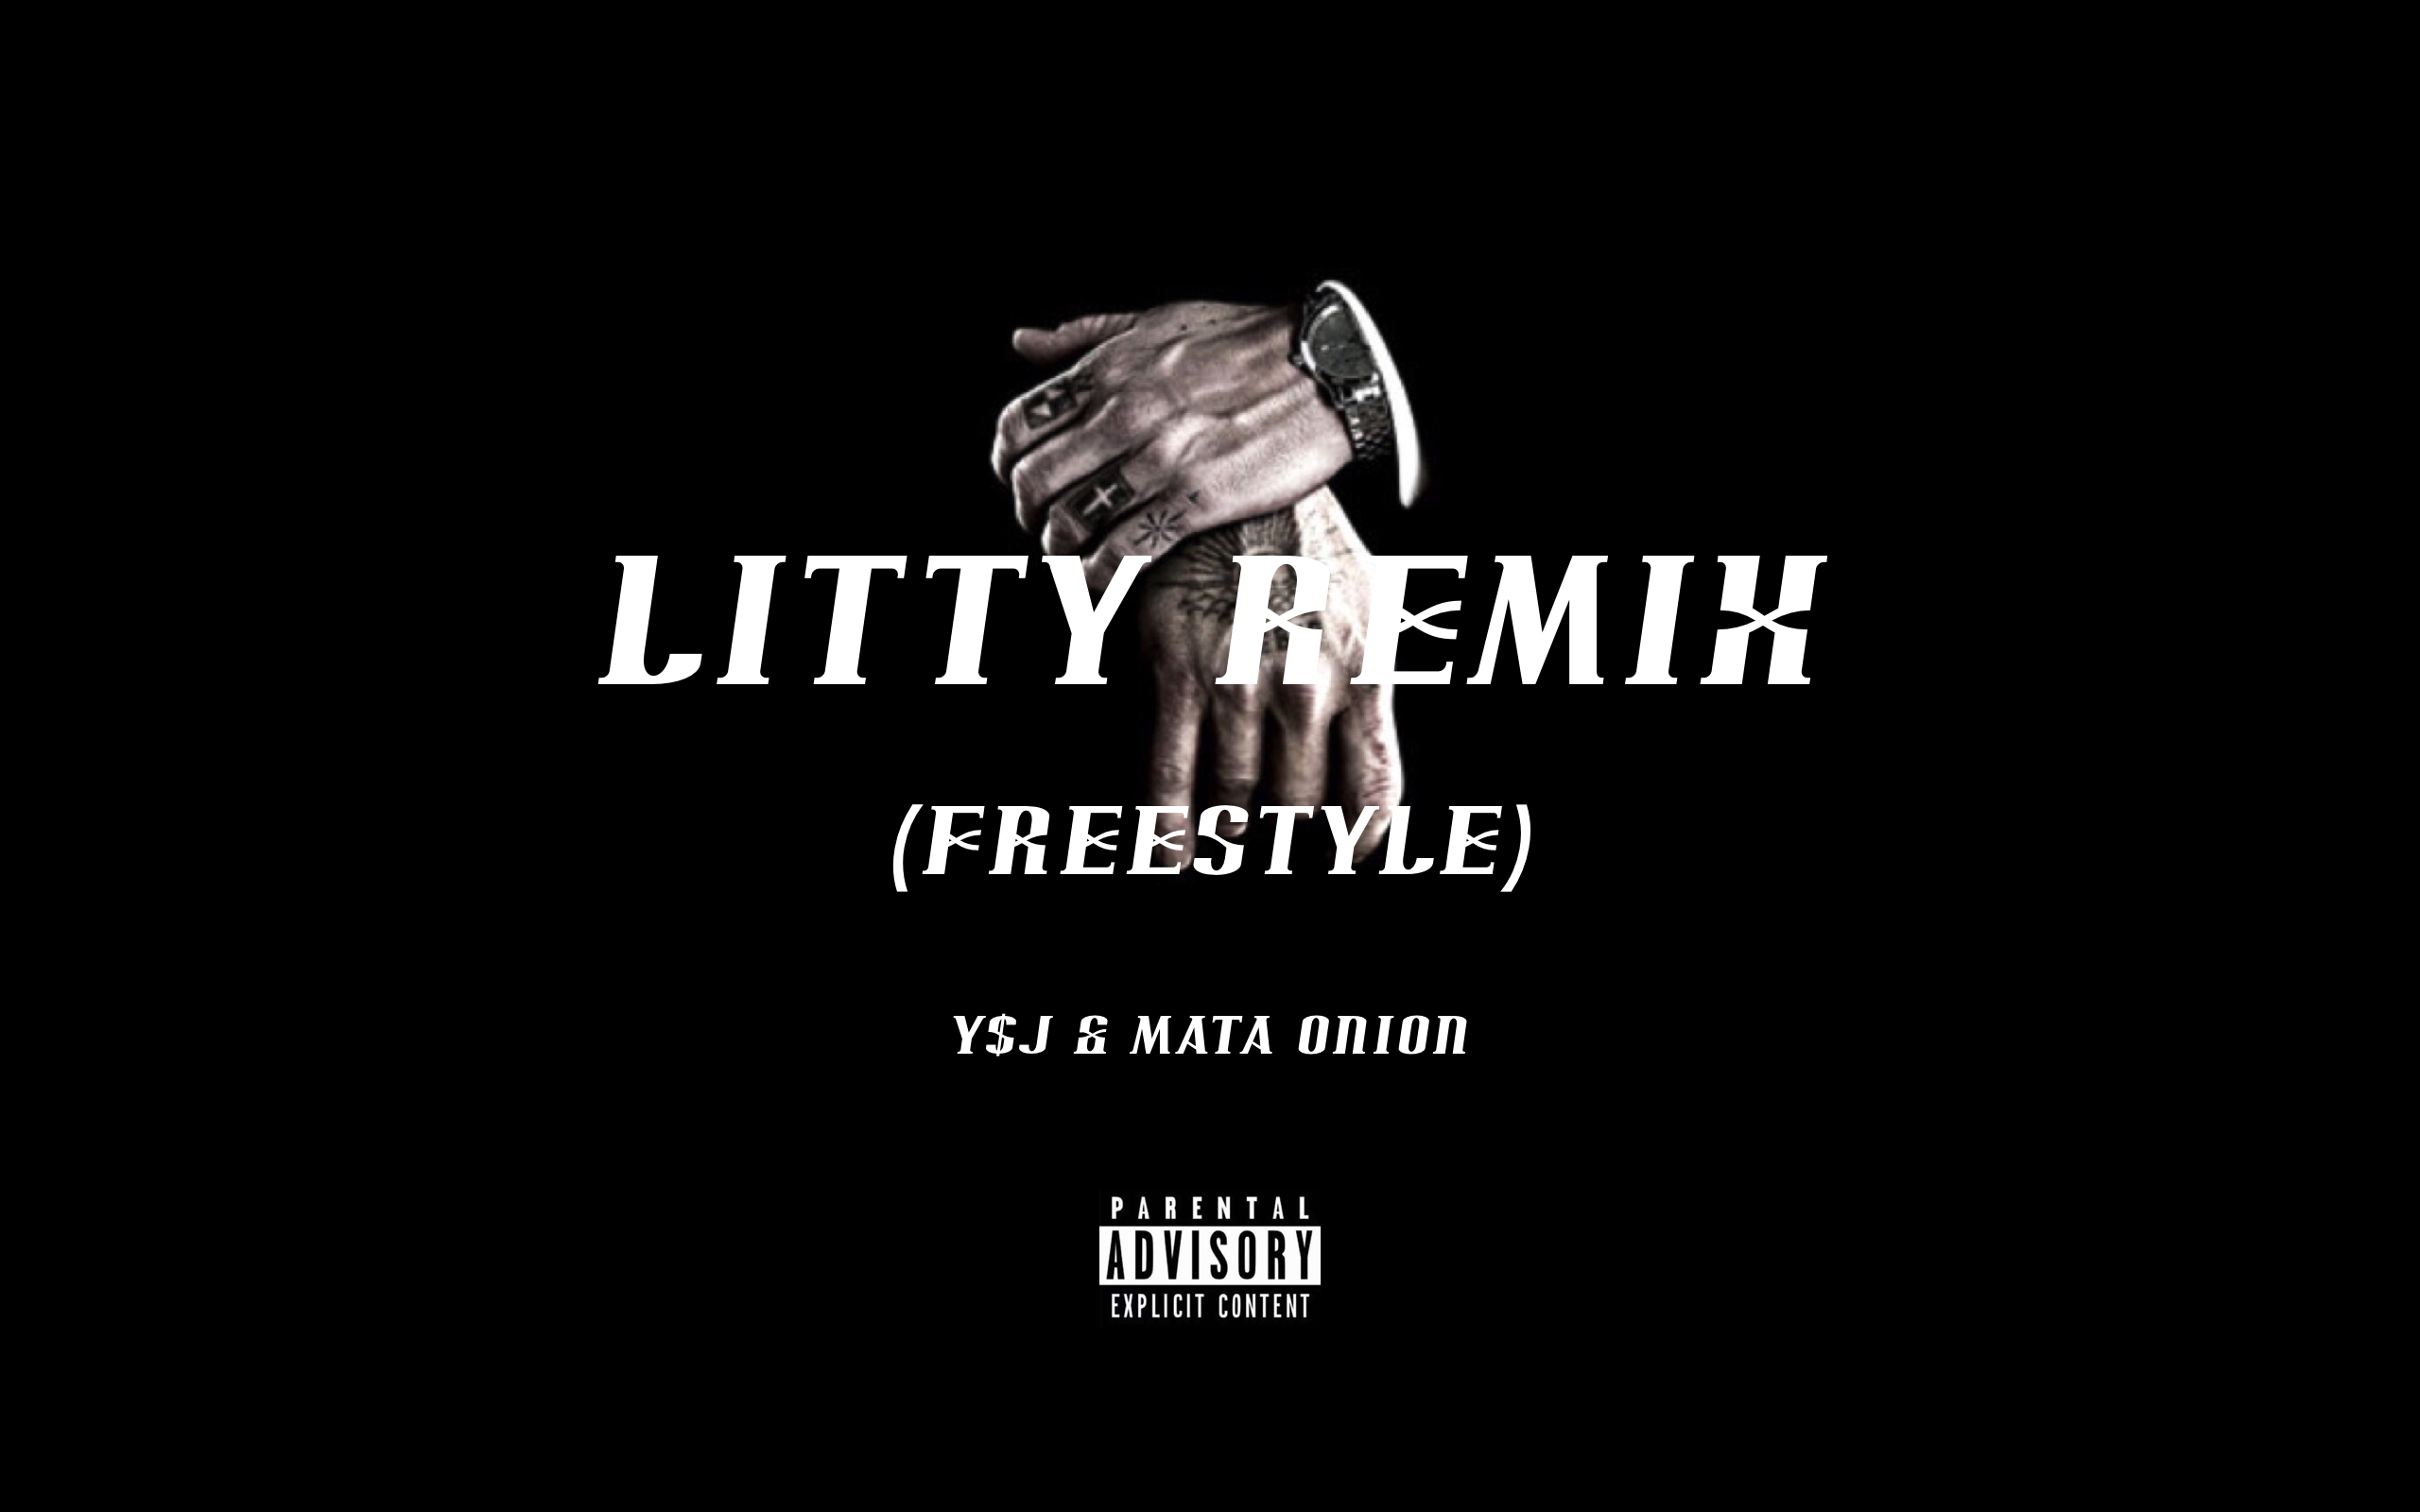 Litty Freestyle